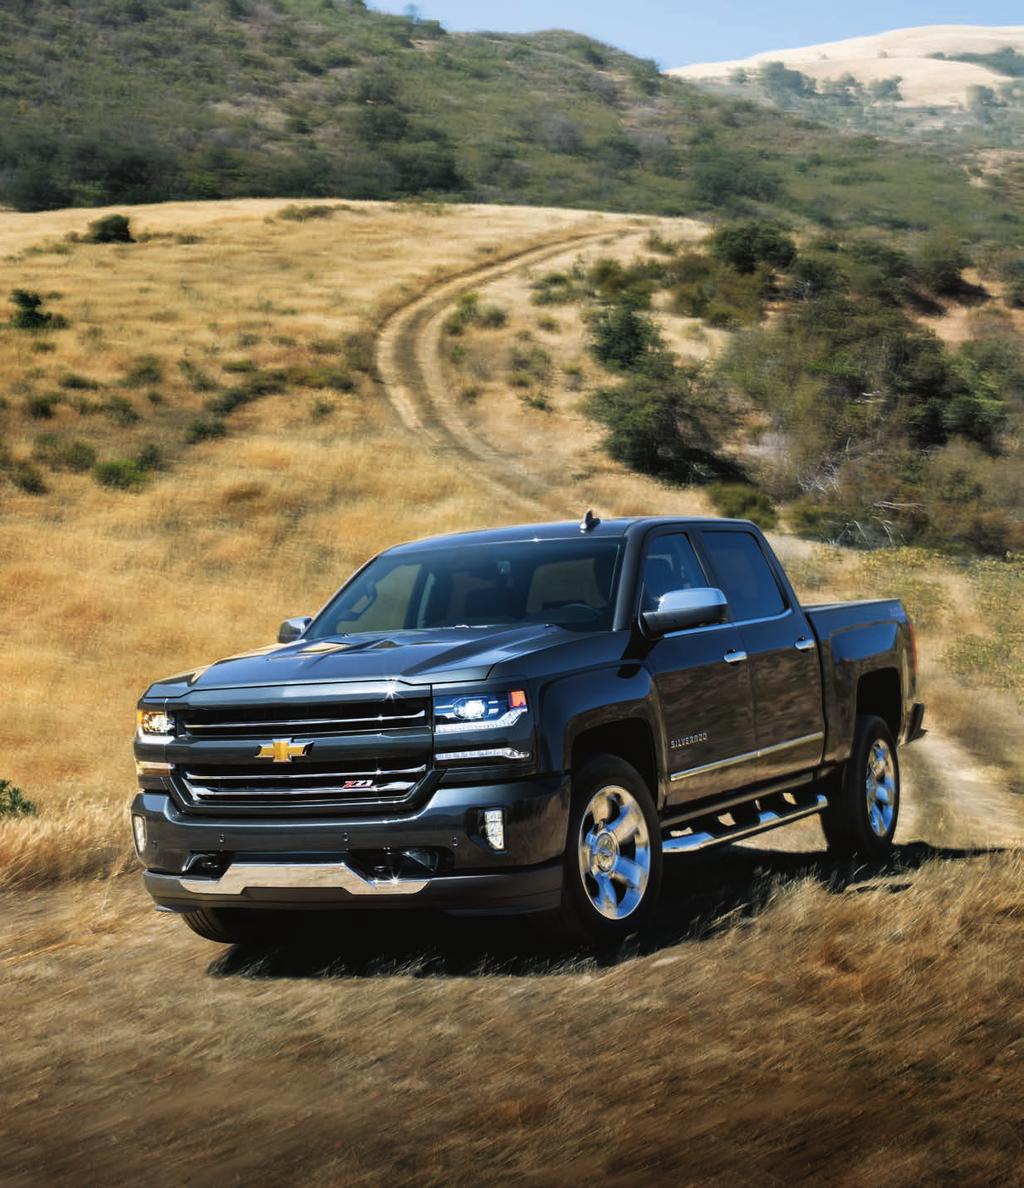 1500 Crew Cab Short Box LTZ Z71 4x4 in Graphite Metallic with available features and dealer-installed Chevrolet Accessories. LAST NAME DEPENDABLE. FIRST NAME MOST.